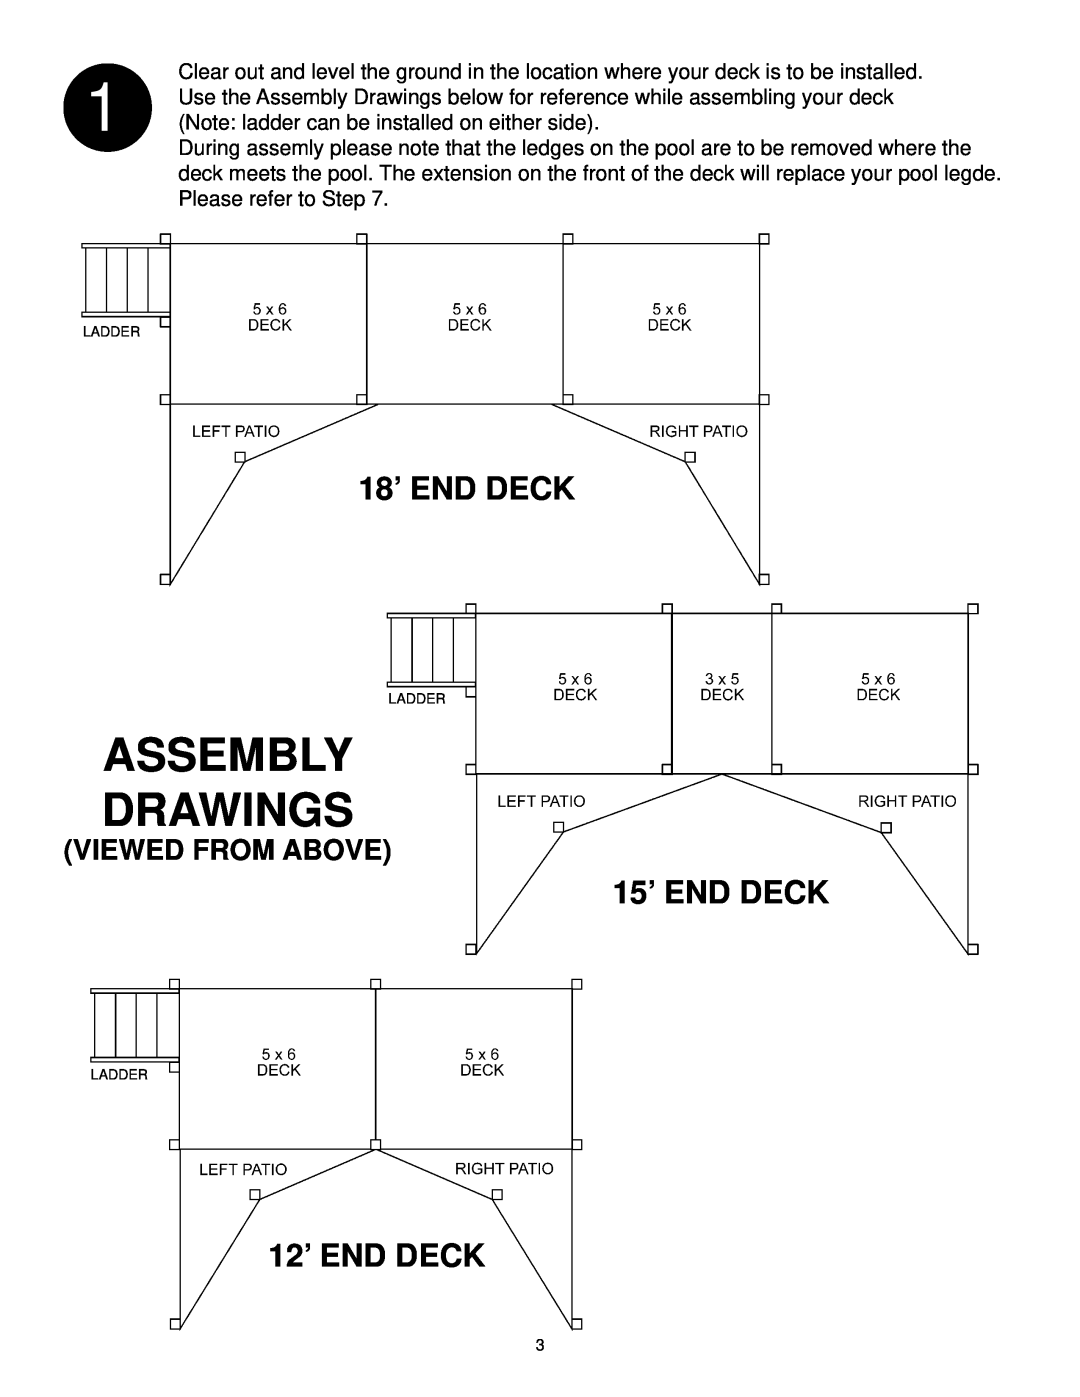 Swim'n Play end deck manual 18’ END DECK, 15’ END DECK, 12’ END DECK, Viewed From Above, Assembly Drawings 